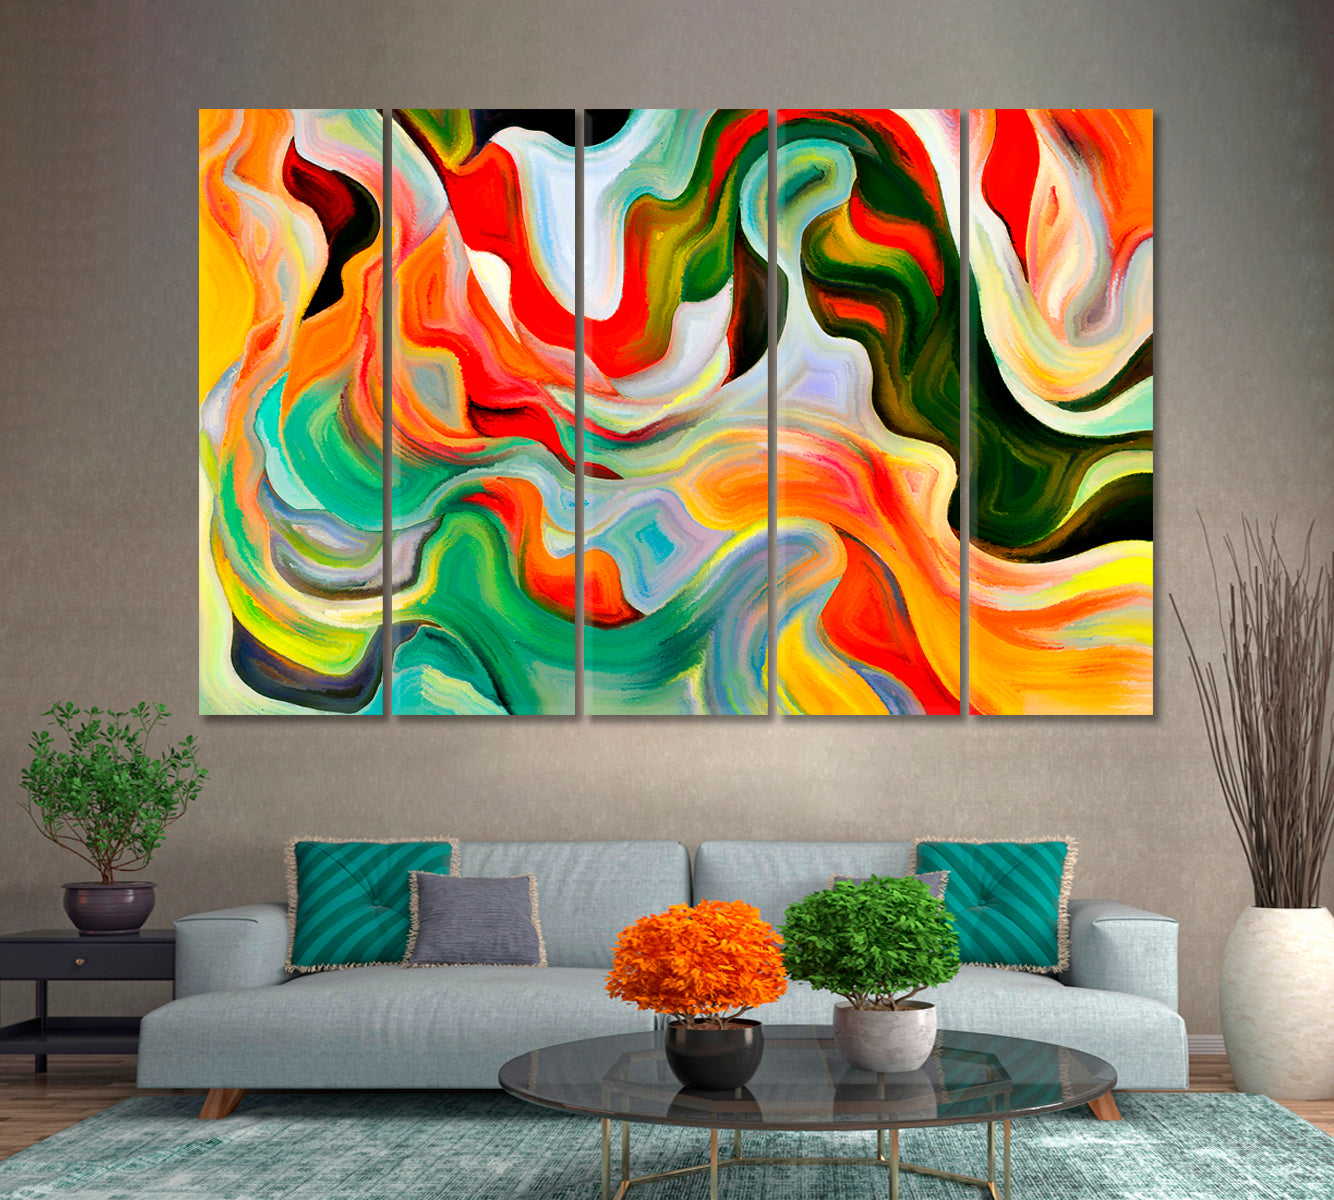 Shapes Within Beautiful Colorful Abstraction Abstract Art Print Artesty 5 panels 36" x 24" 